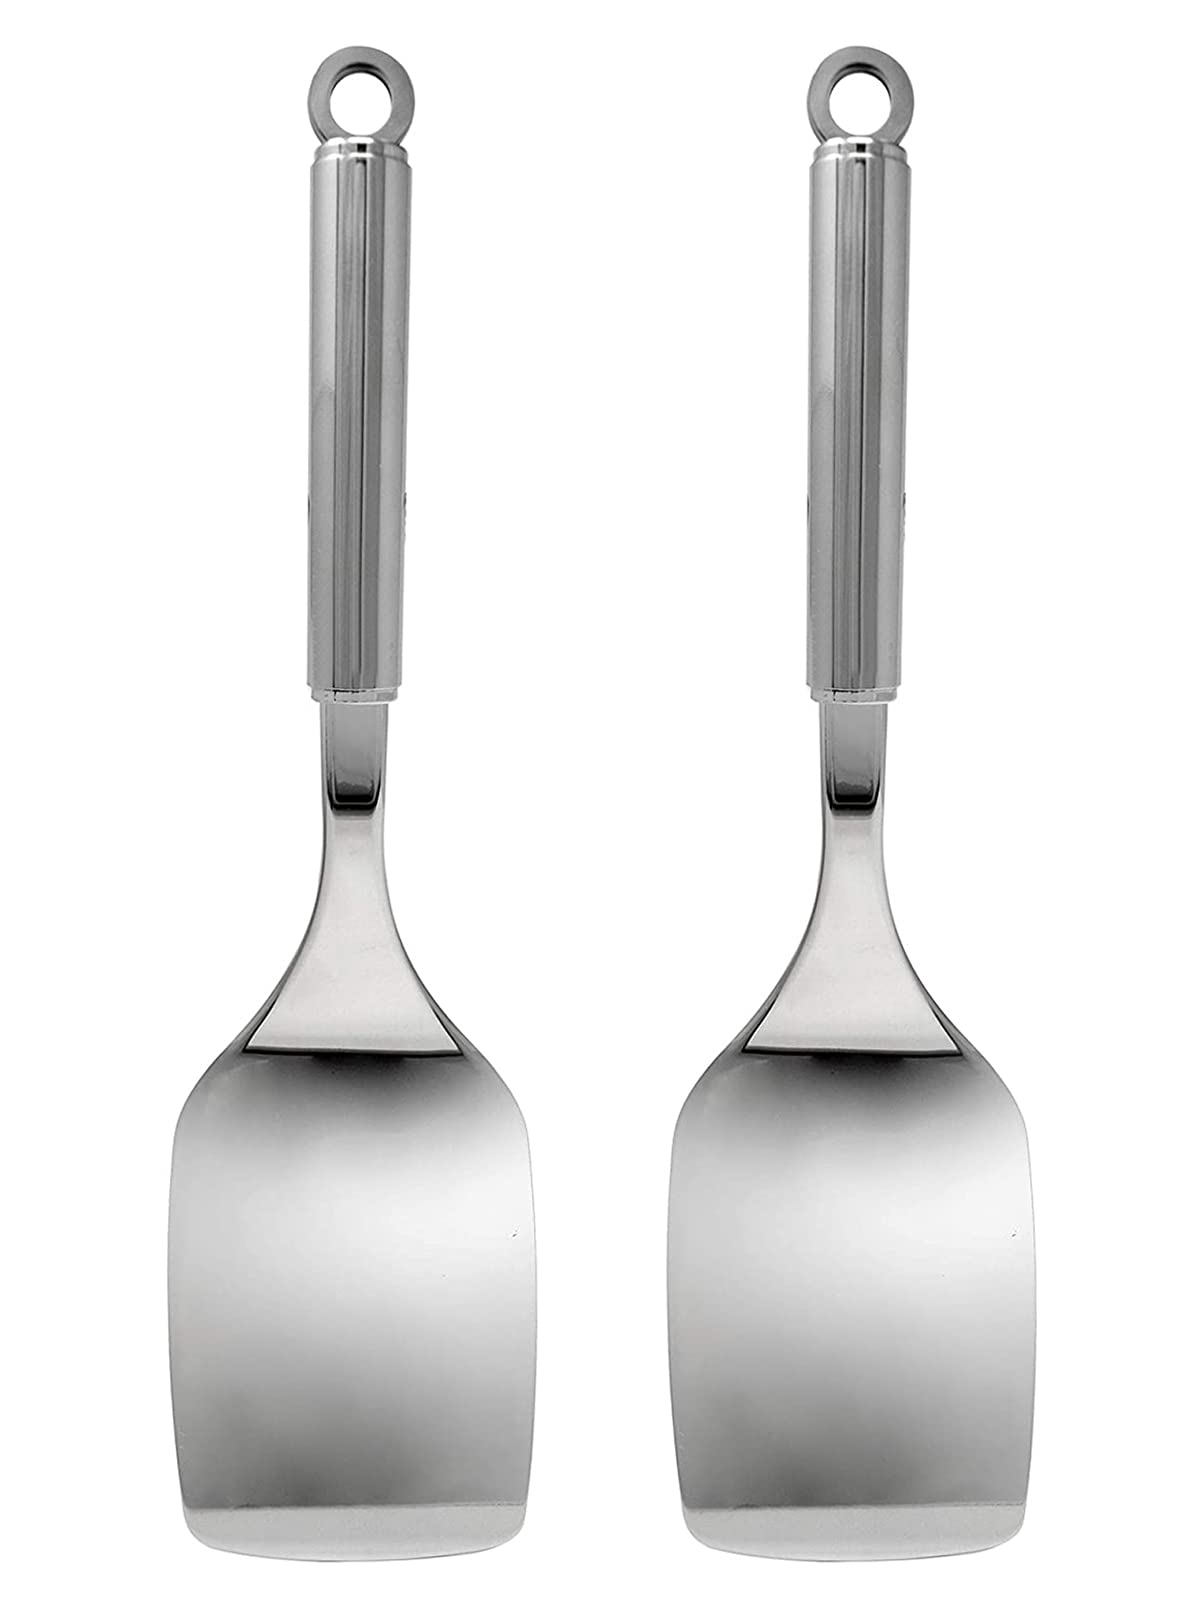 Kuber Industries Stainless Steel Turners/Spatulas/Cooking Turner/for Dosa, Roti, Omlette, ParatHas, PavBHaji-Pack of 2 (Silver) (Model Number: HS_37_KUBMART020564)